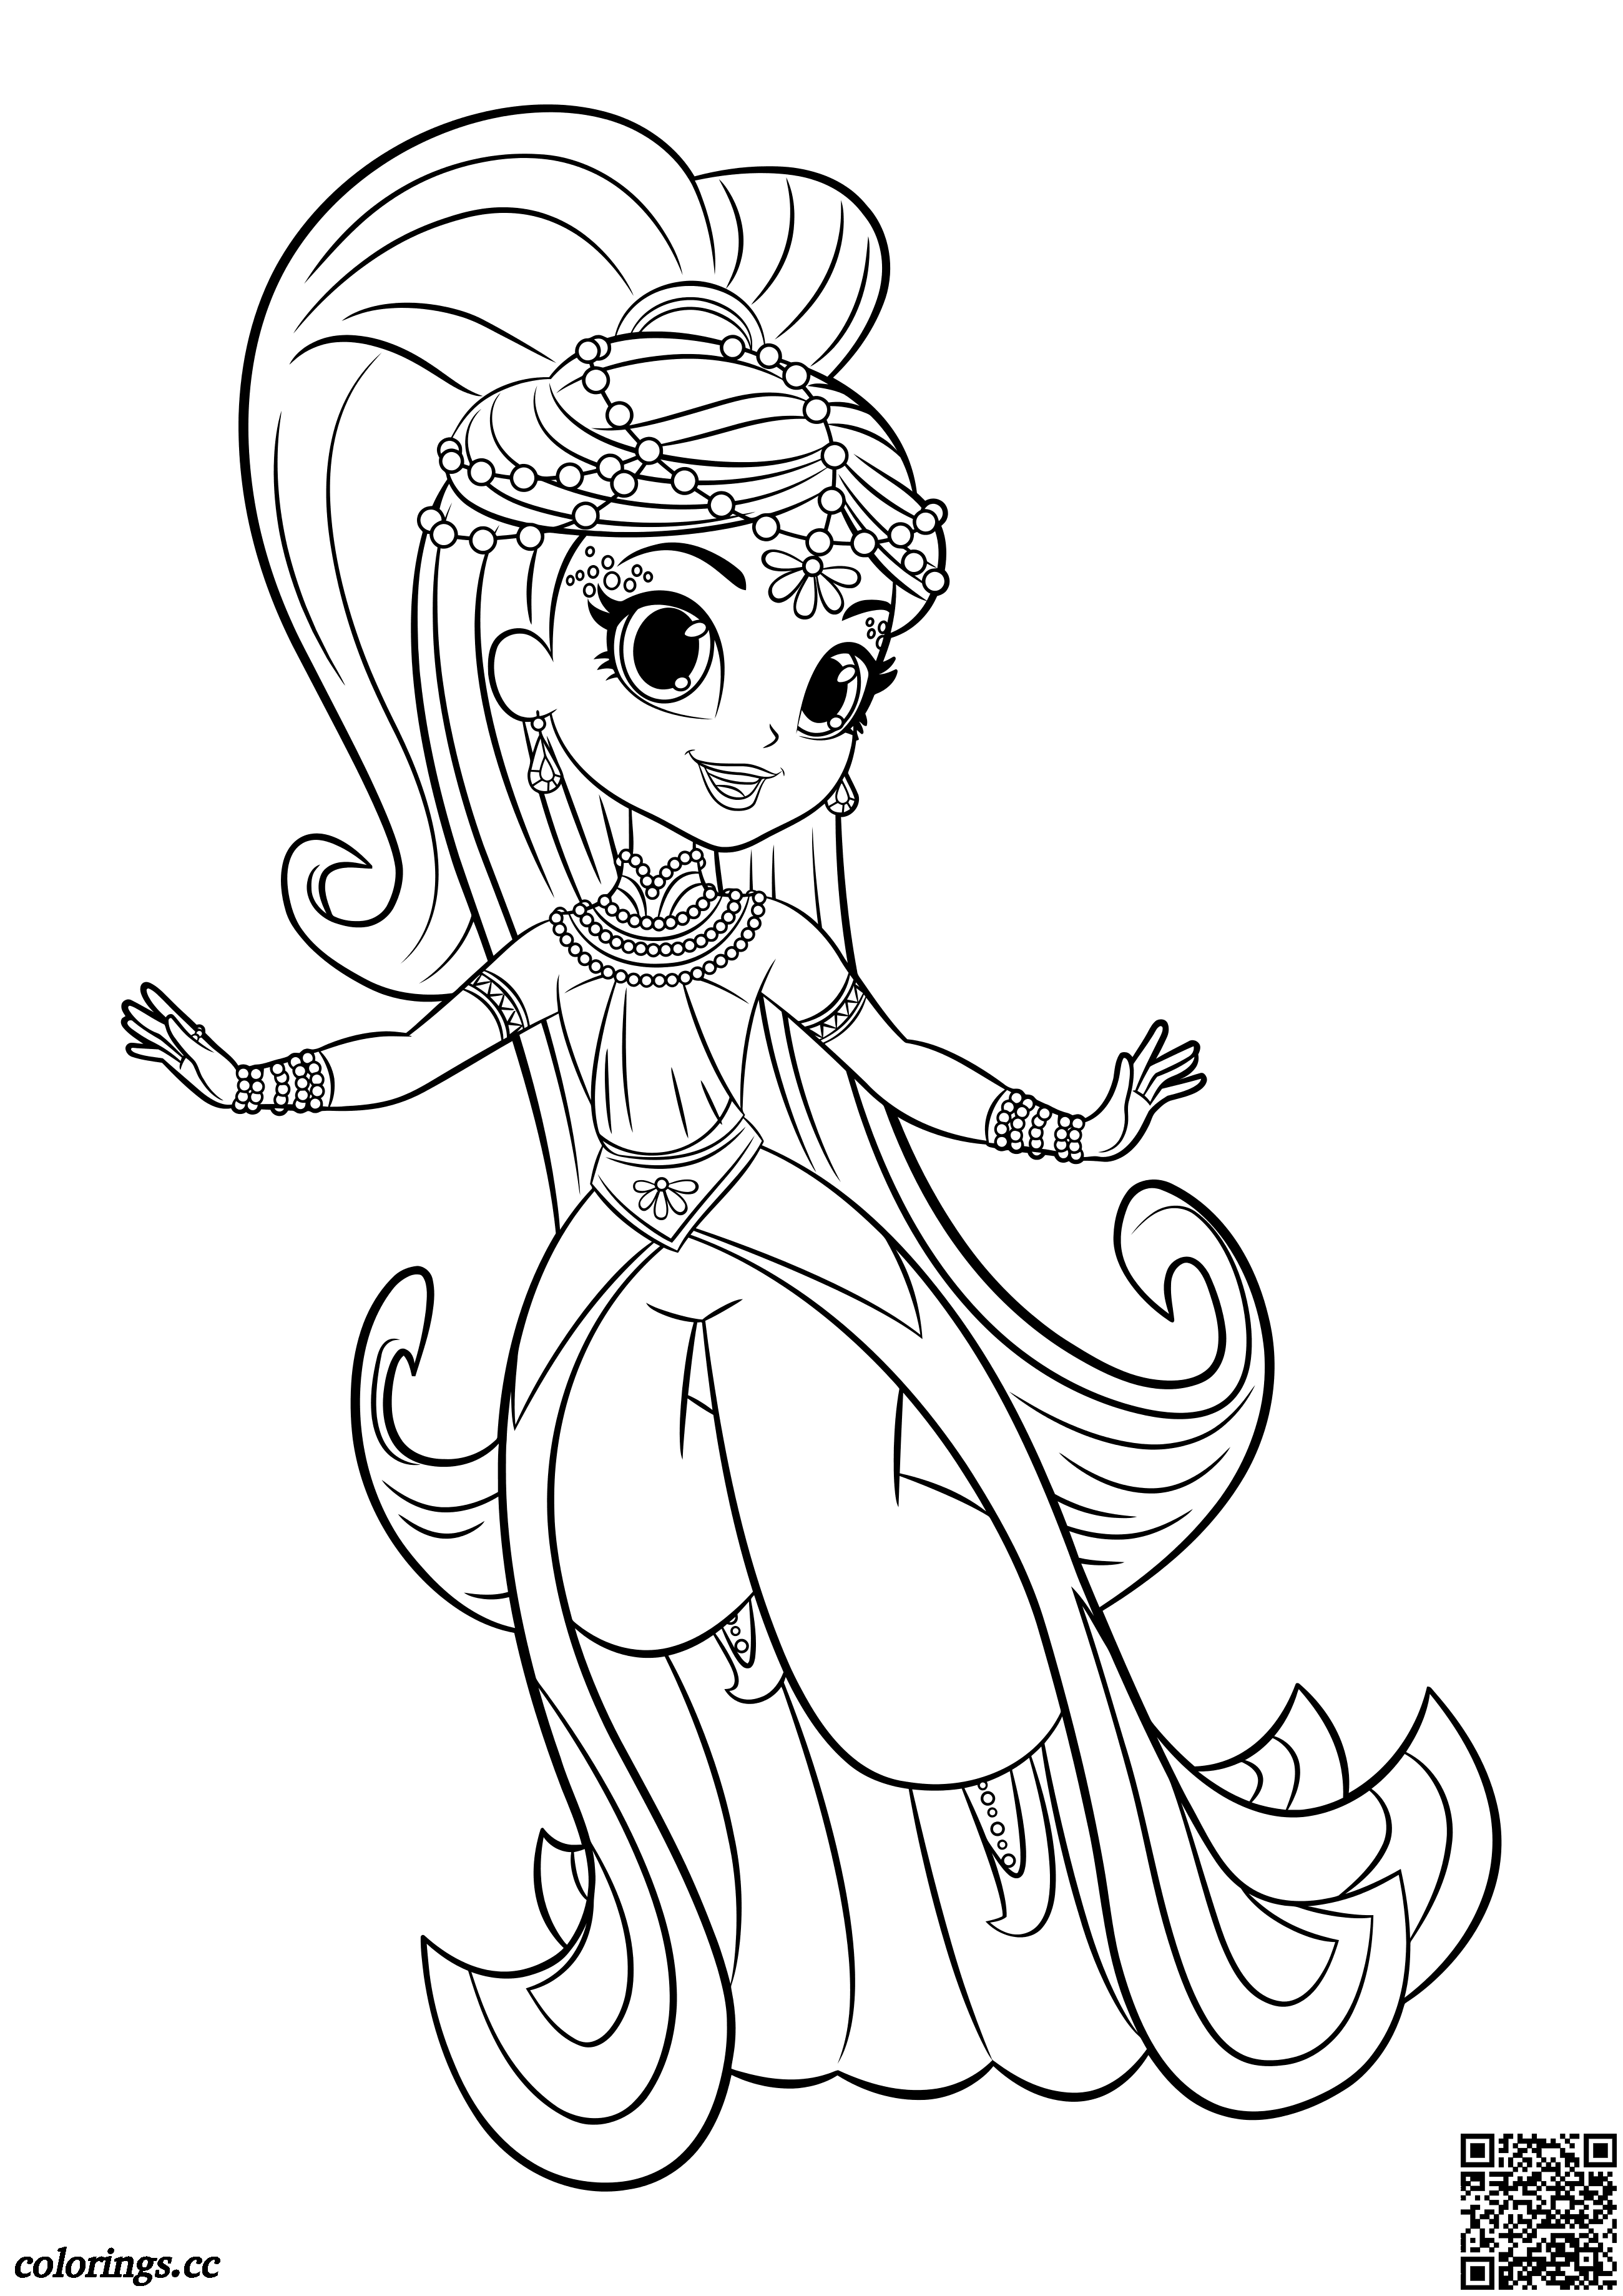 Princess Samira coloring pages, Shimmer and Shine coloring pages ...